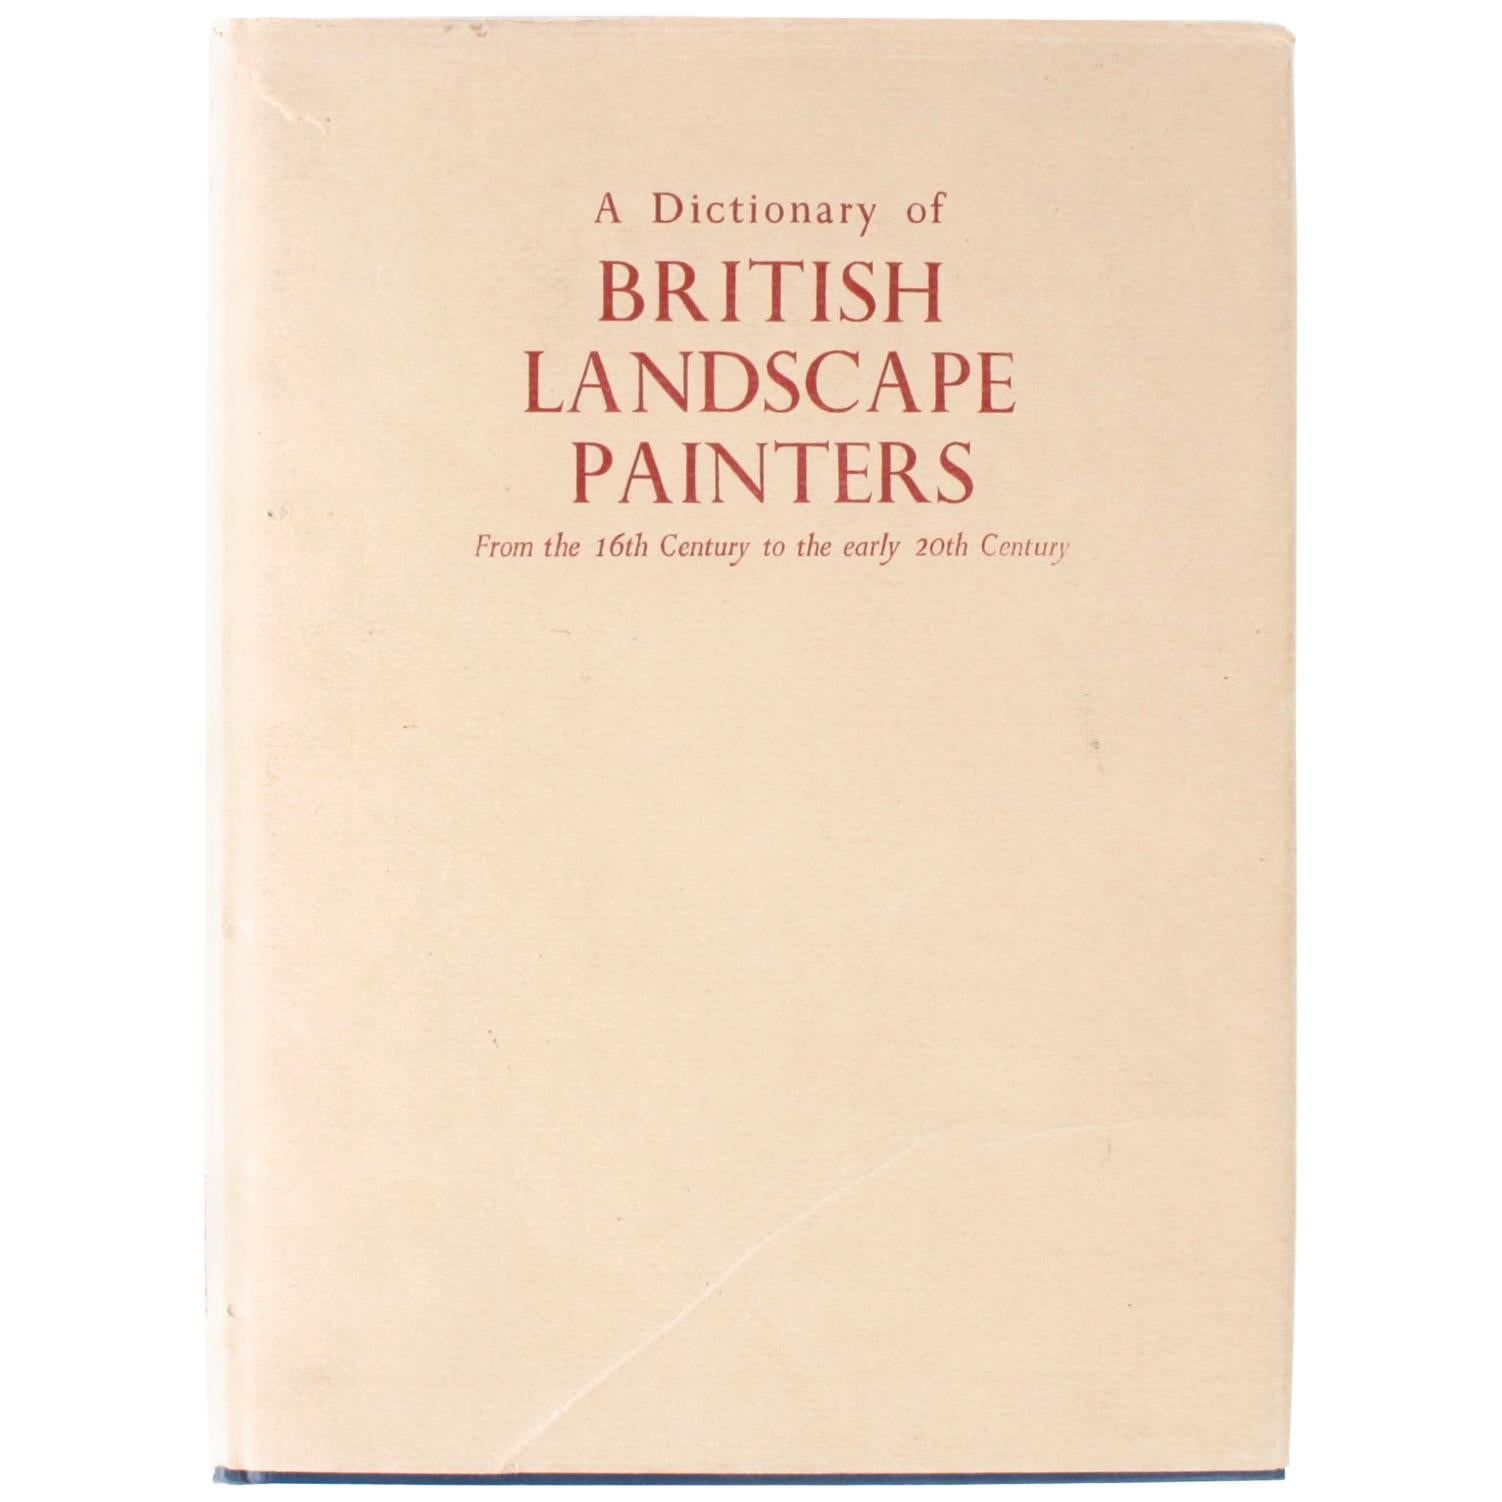 Dictionary of British Landscape Painters by Maurice H. Grant